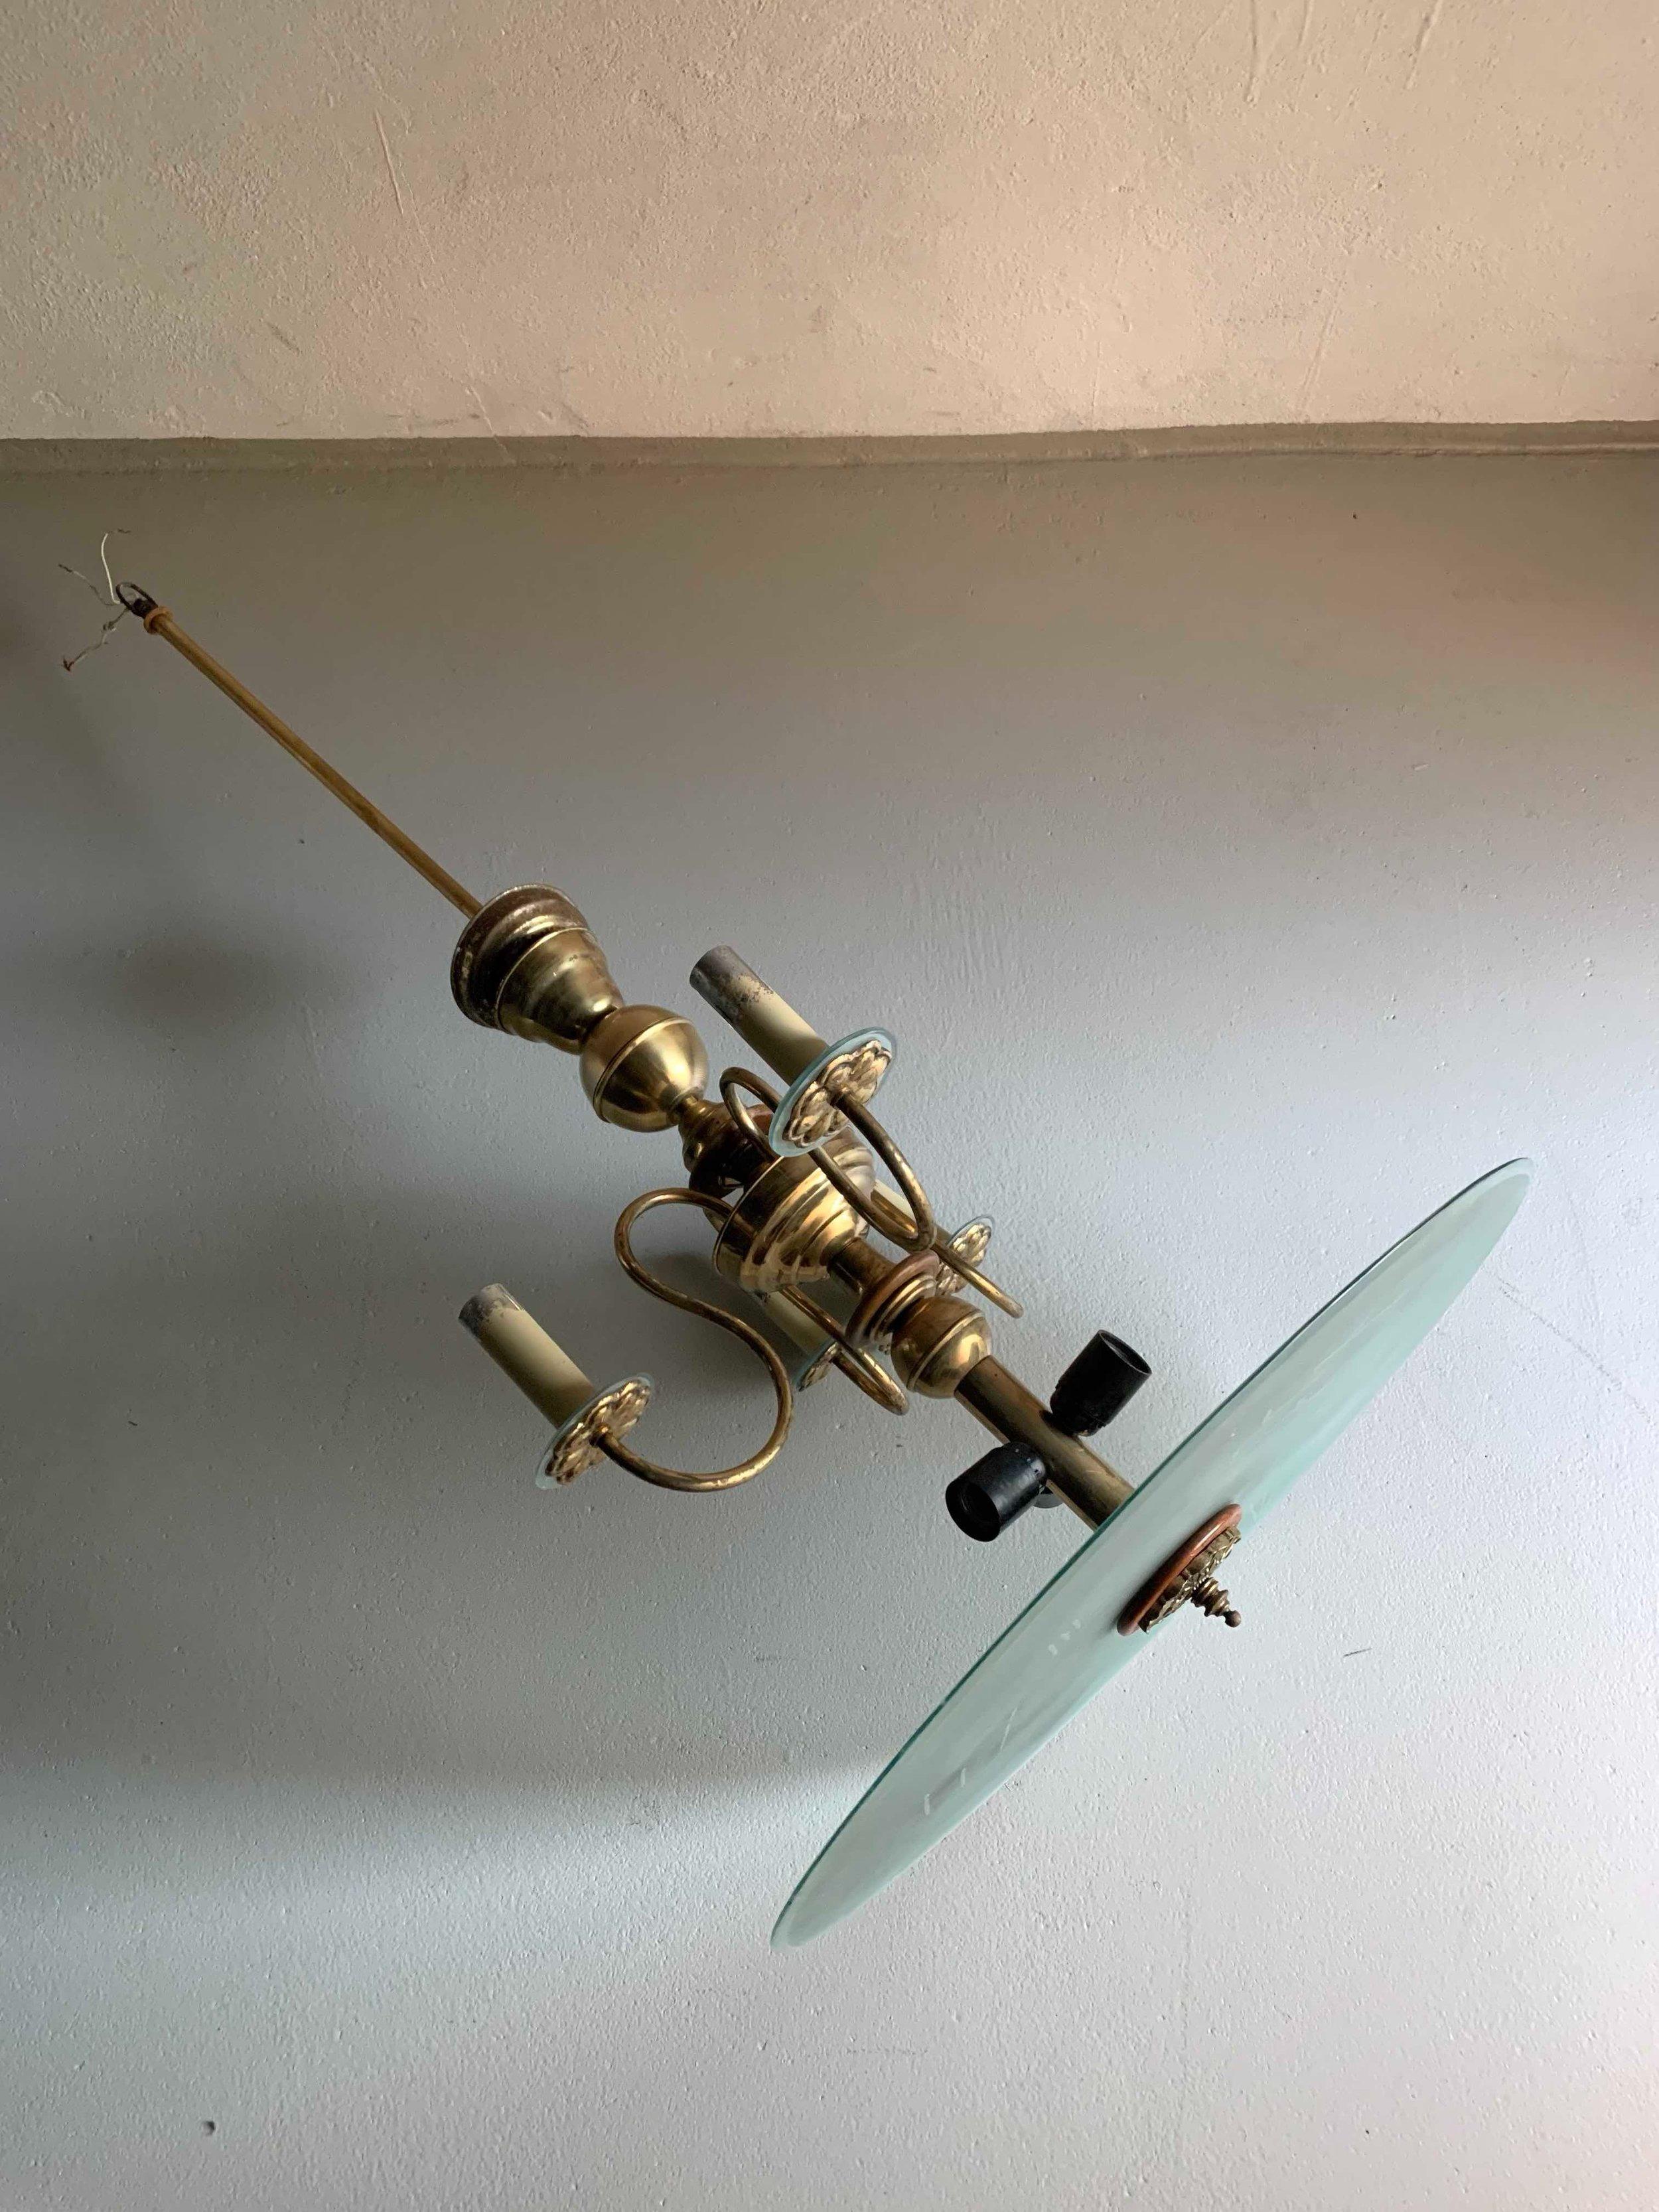 Large Art deco chandelier - brass and oak details, frosted glass plate-shade.

Additional information:
Country of manufacture: Germany
Design period: 1930s
Dimensions: 60 D x 107 H cm 
Condition: Good vintage condition with some signs of use on a